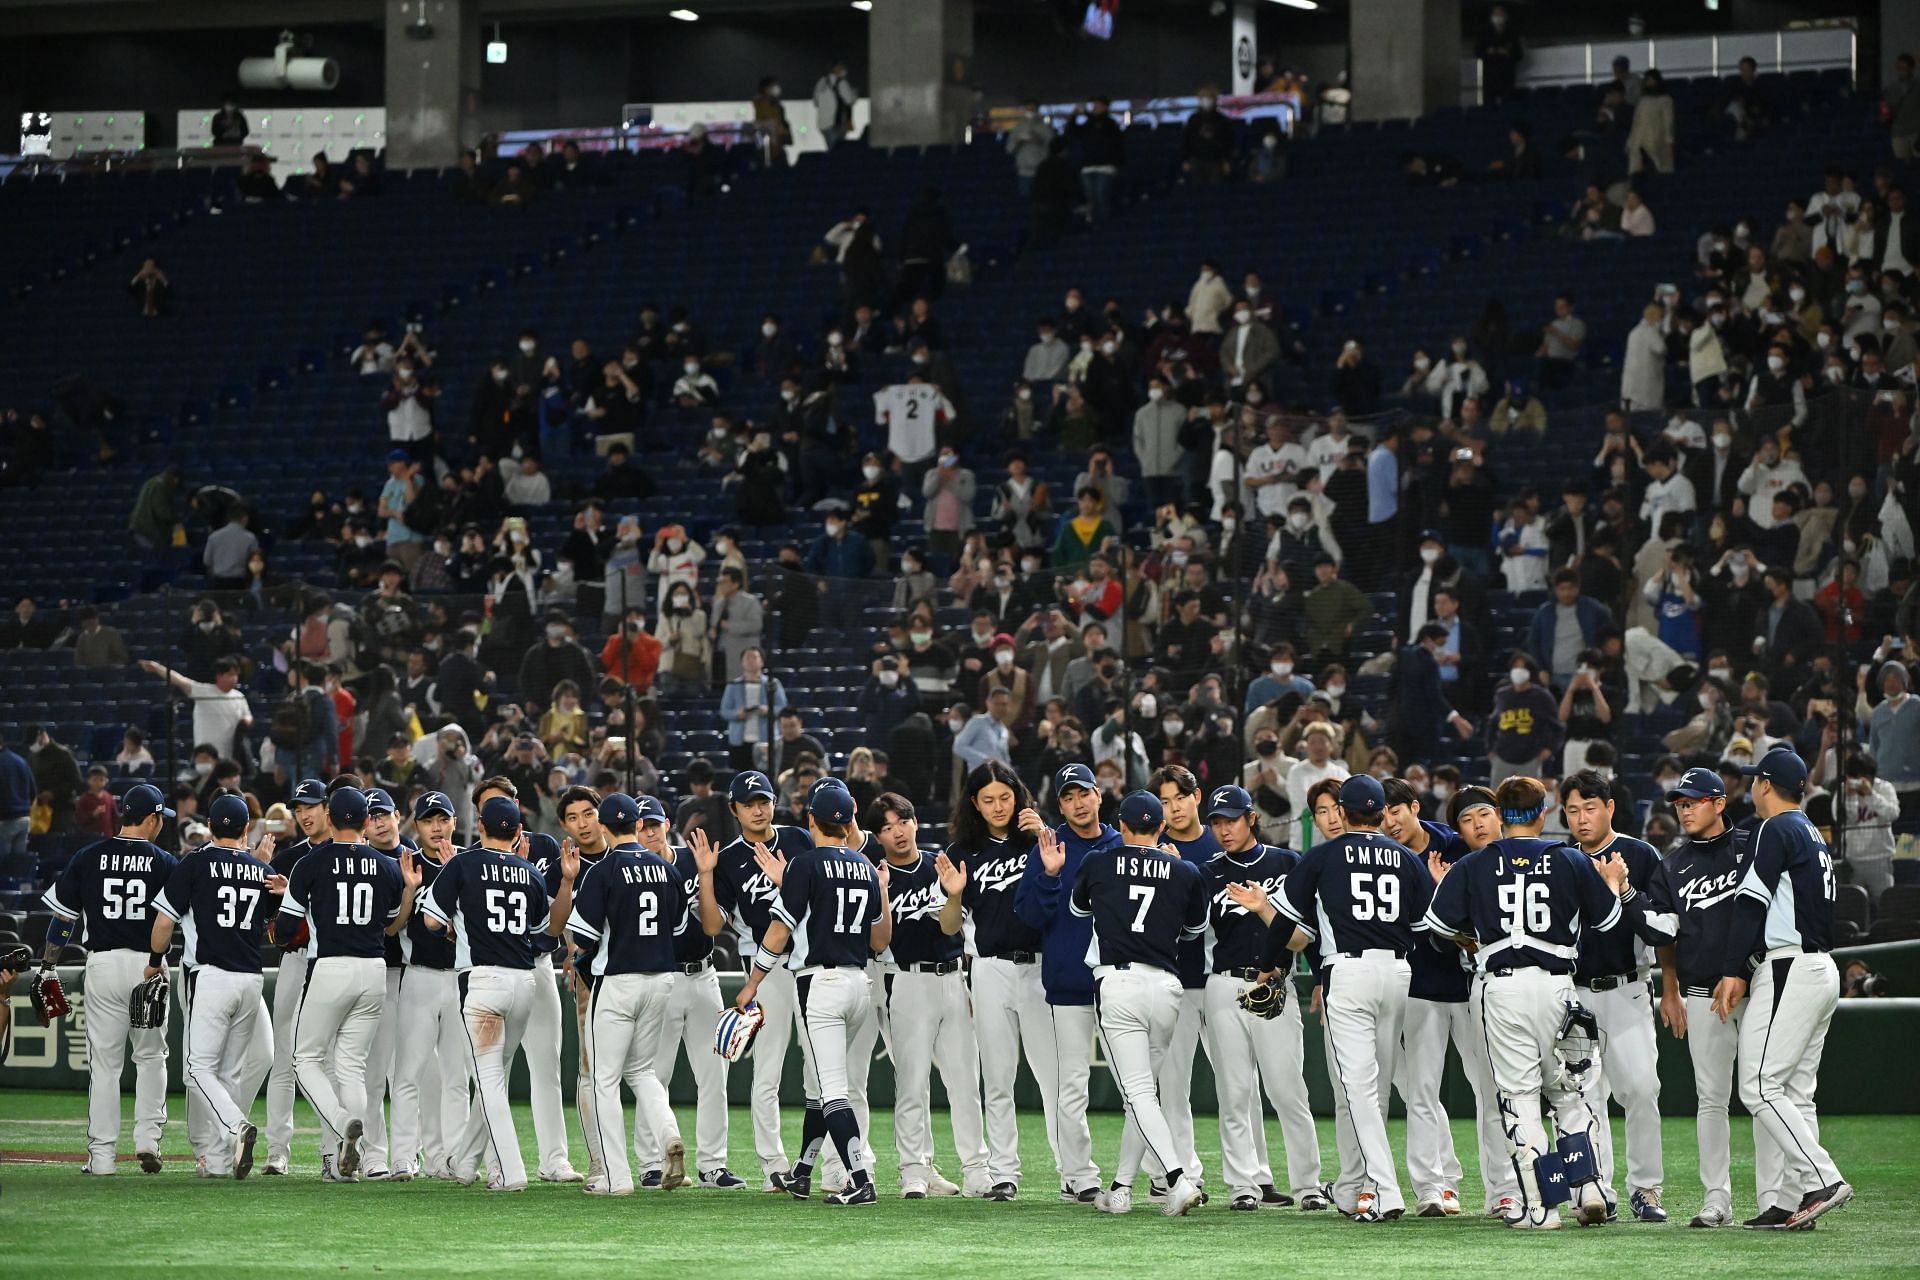 South Korean National Baseball Team Faces Alcohol Controversy After World  Baseball Classic Exit